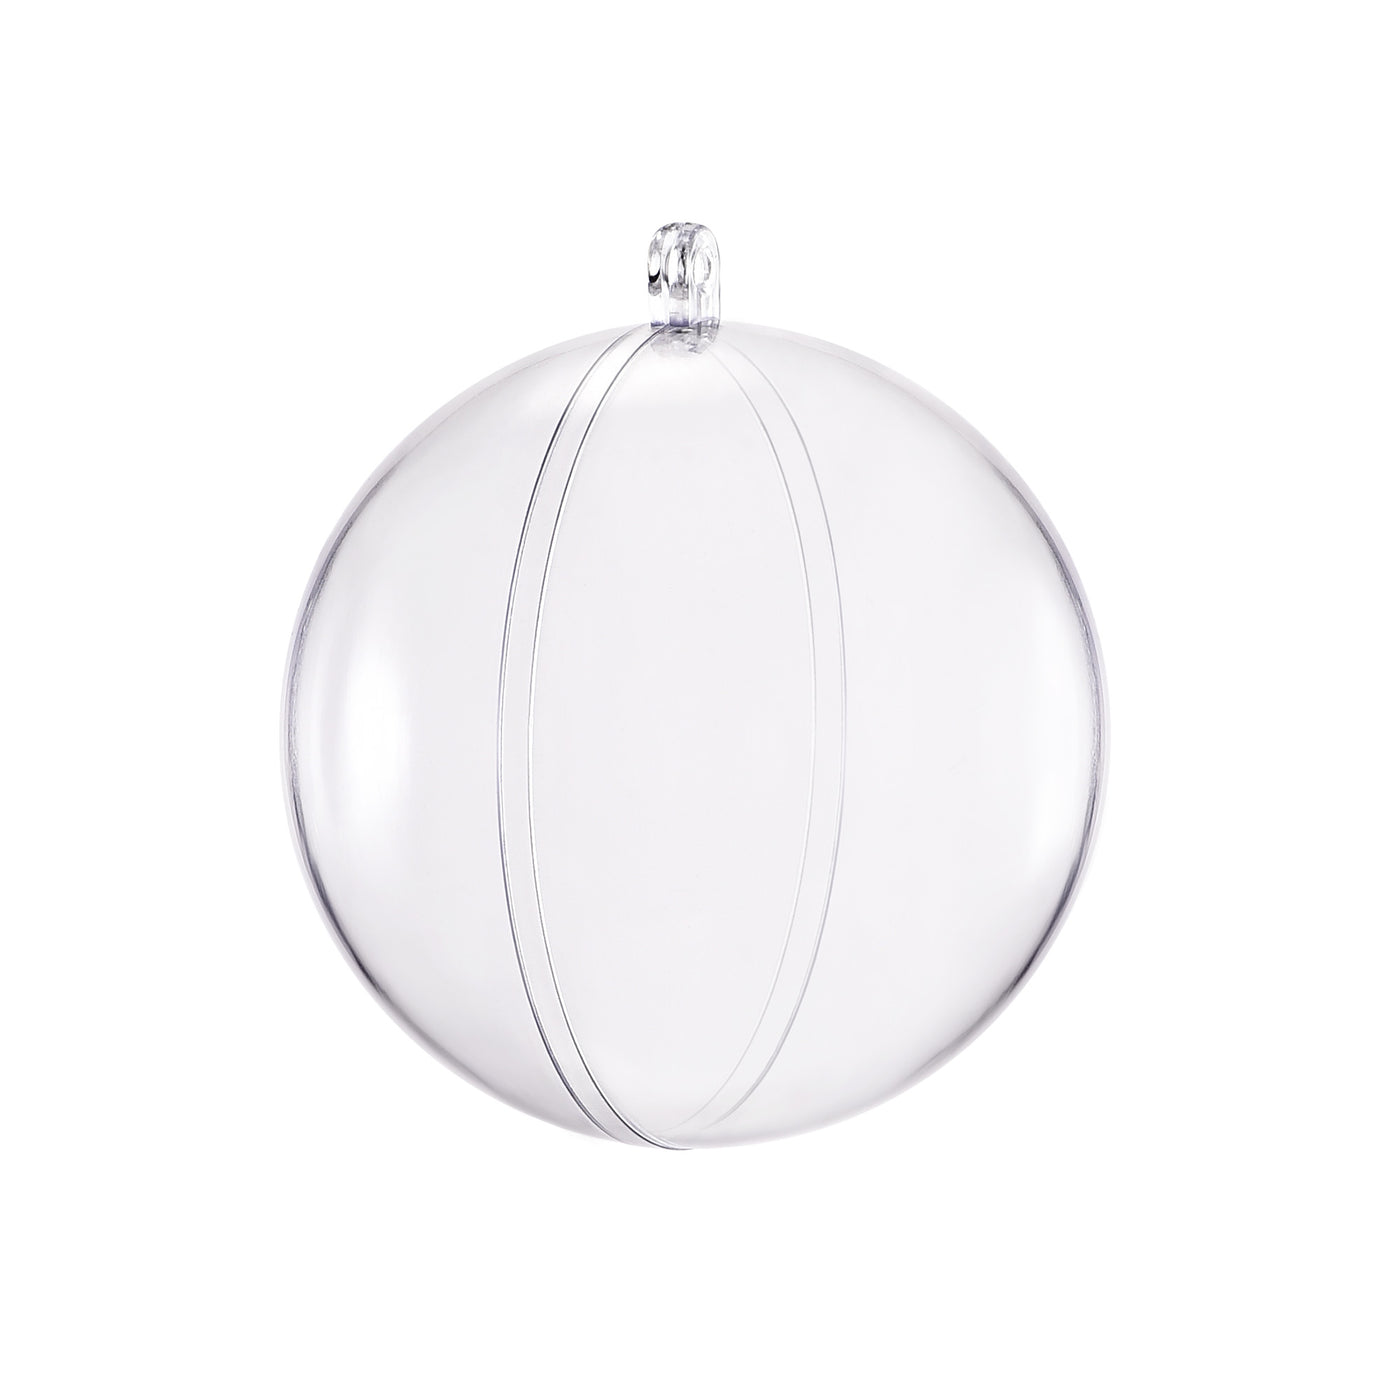 Uxcell Uxcell 24pcs 2 3/8-inch(60mm) Clear Plastic Ornaments Ball